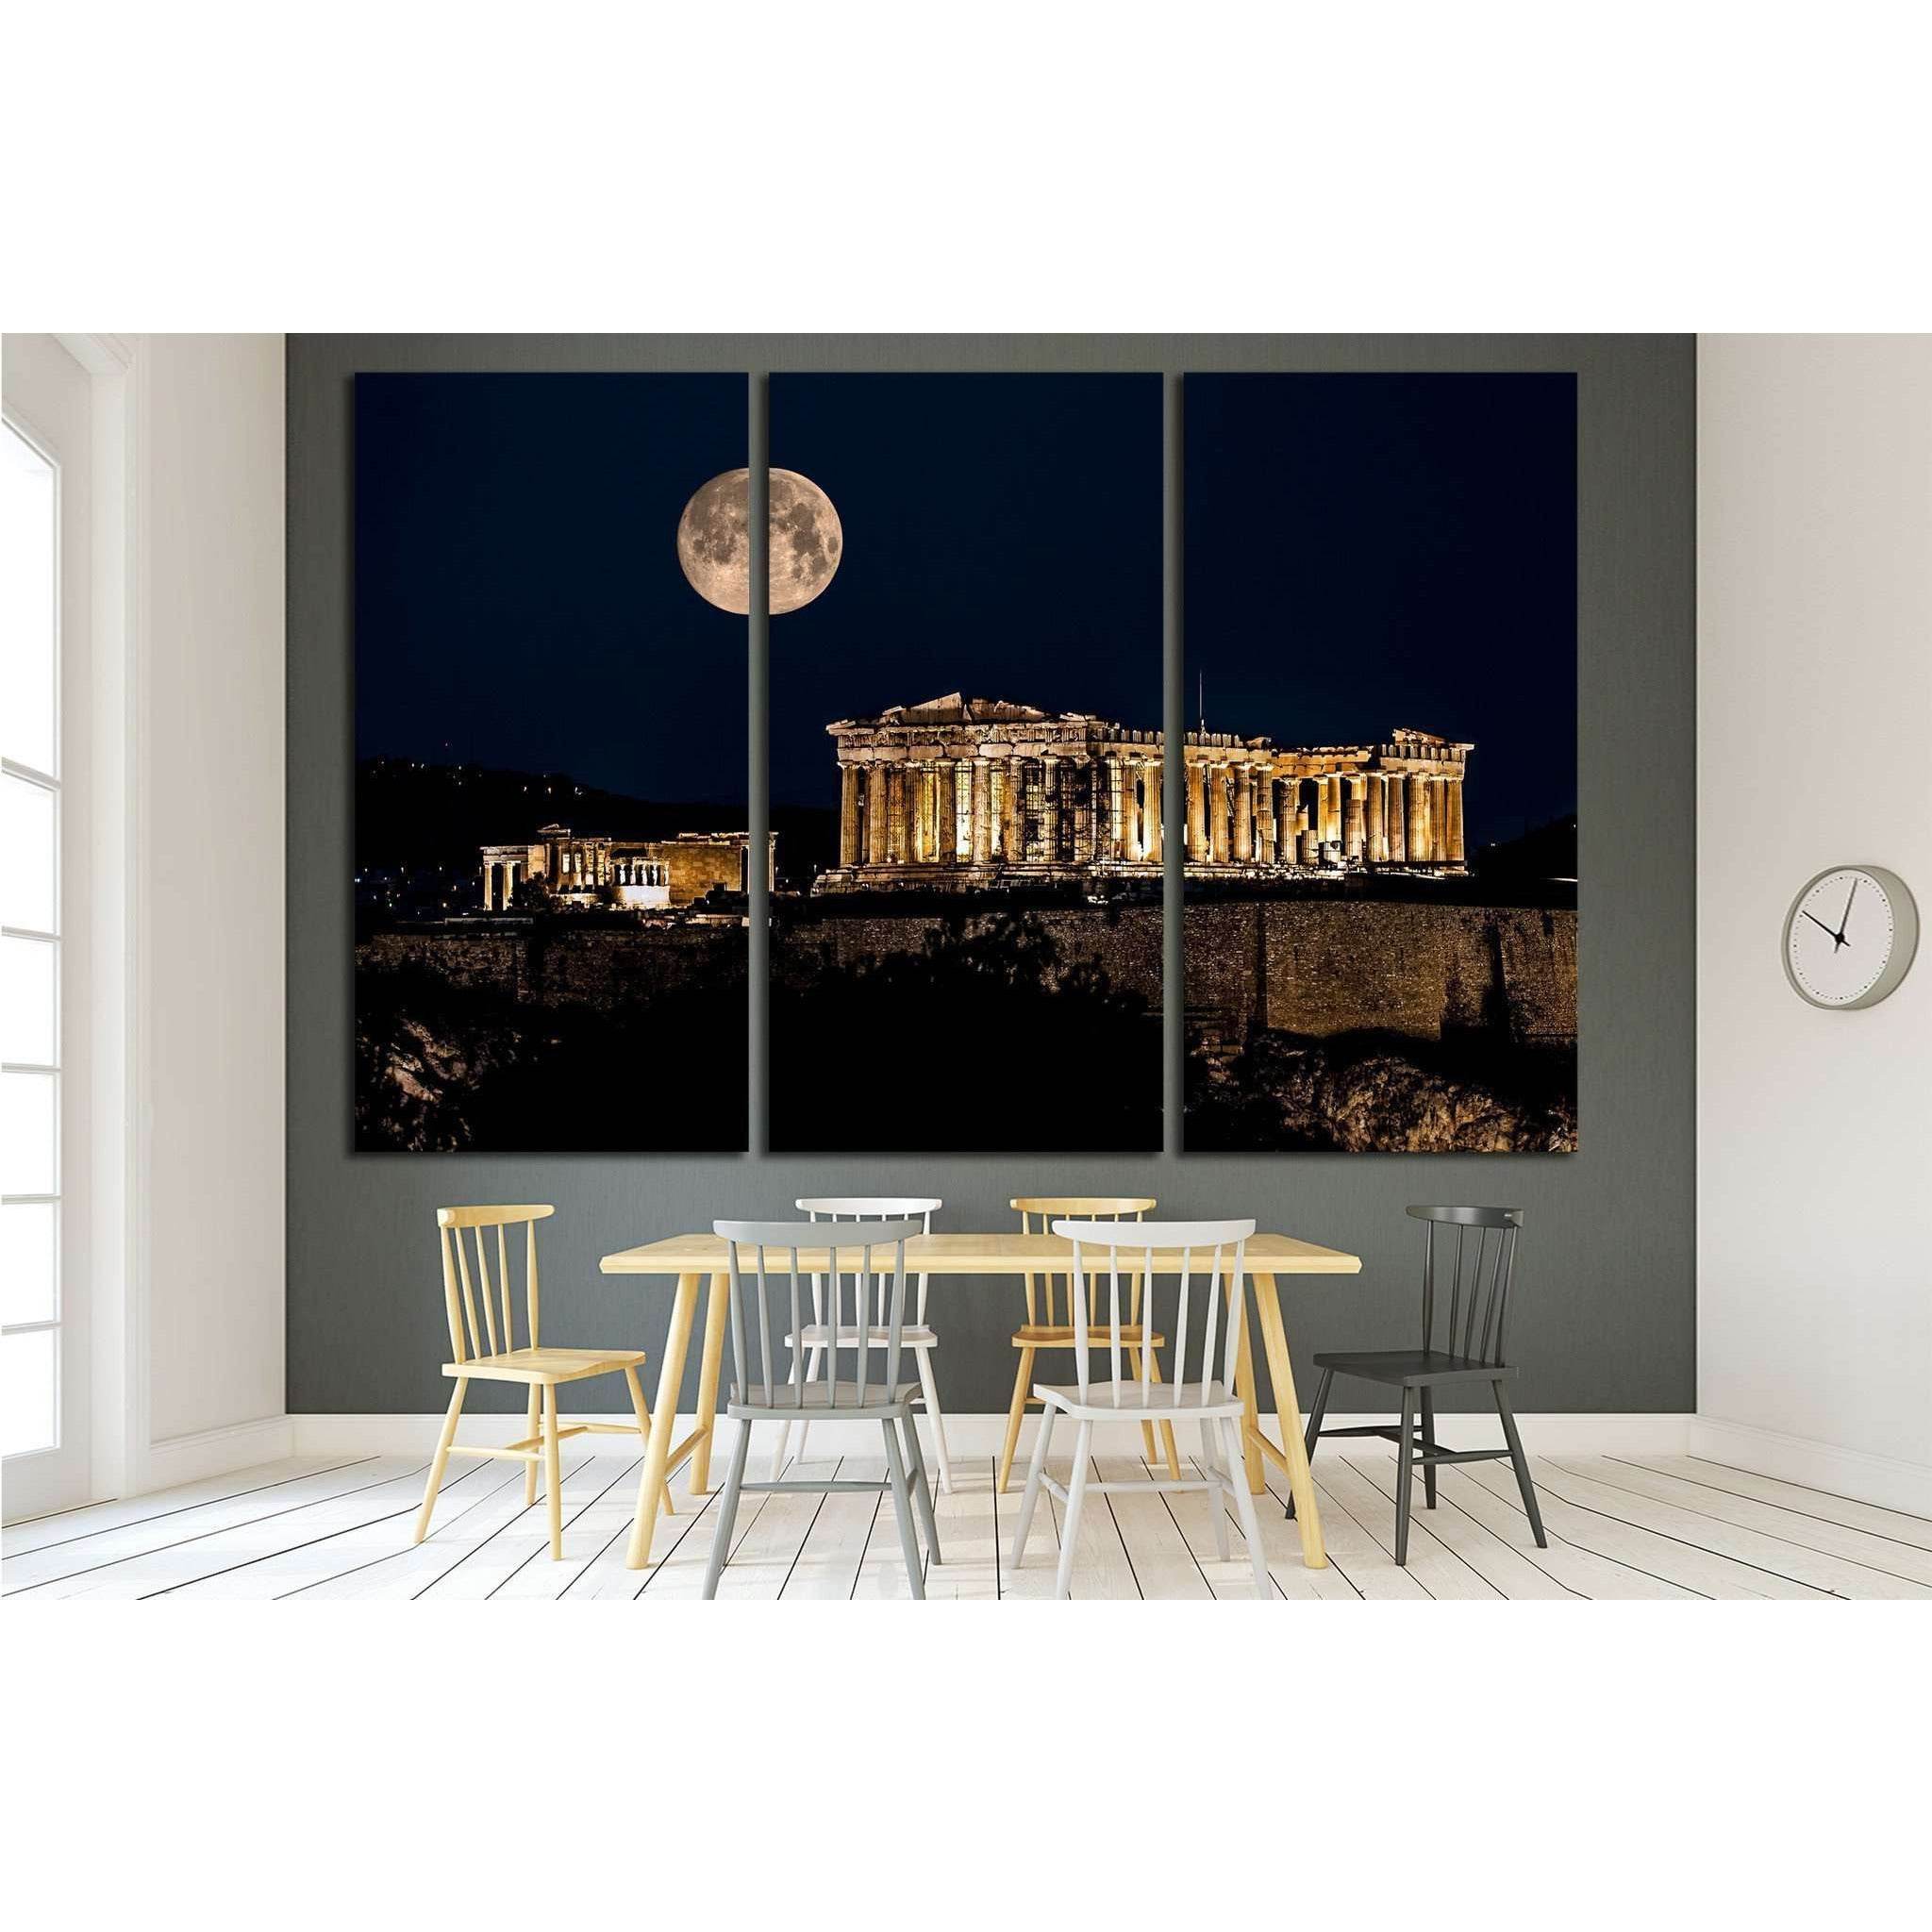 Parthenon of Athens at Night with Full Moon, Greece №2081 Ready to Hang Canvas Print